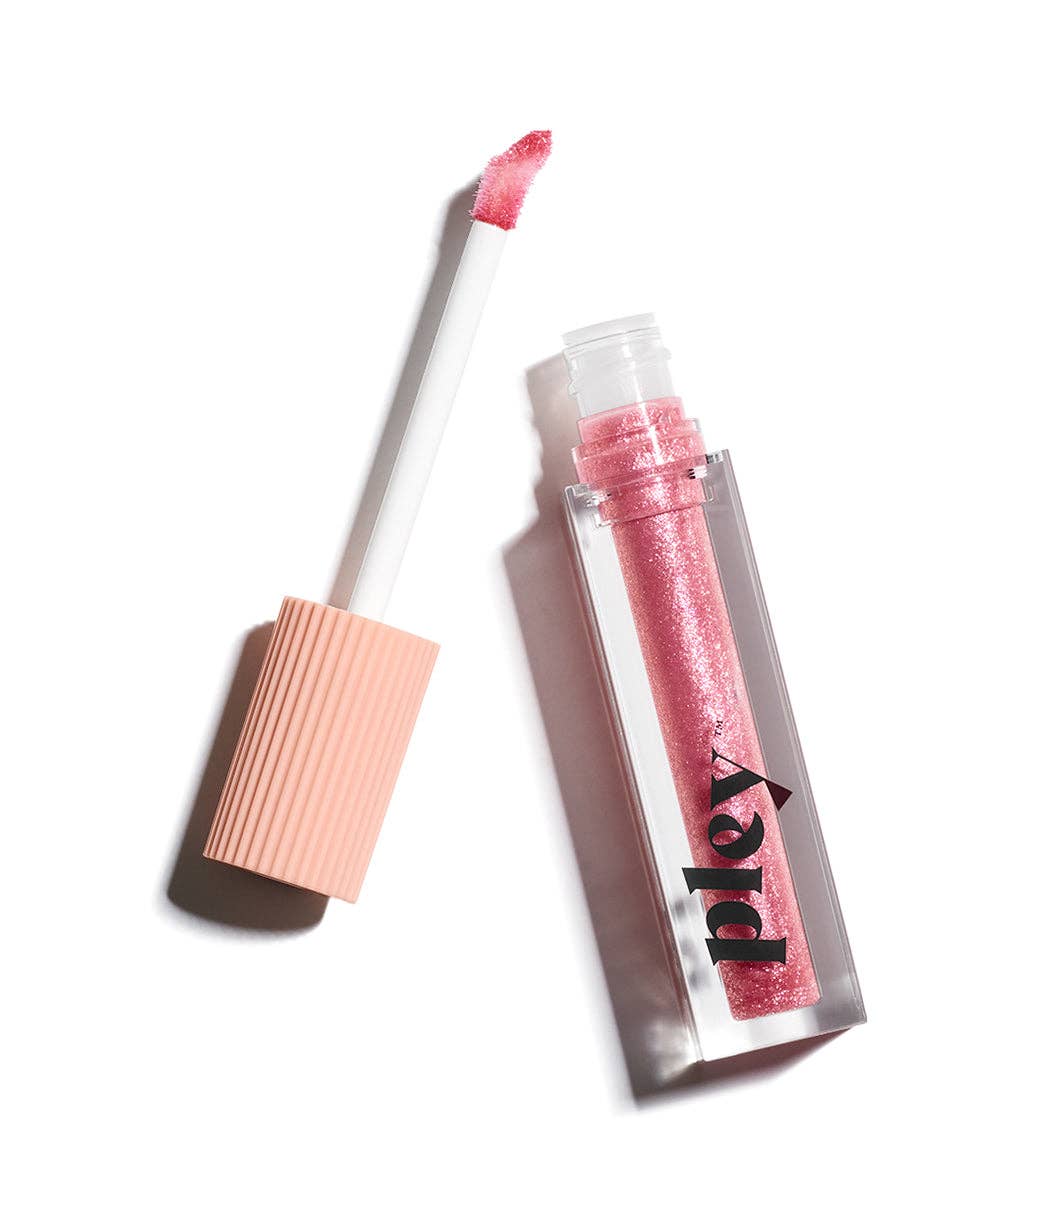 Lust + Found Glossy Lip Lacquer